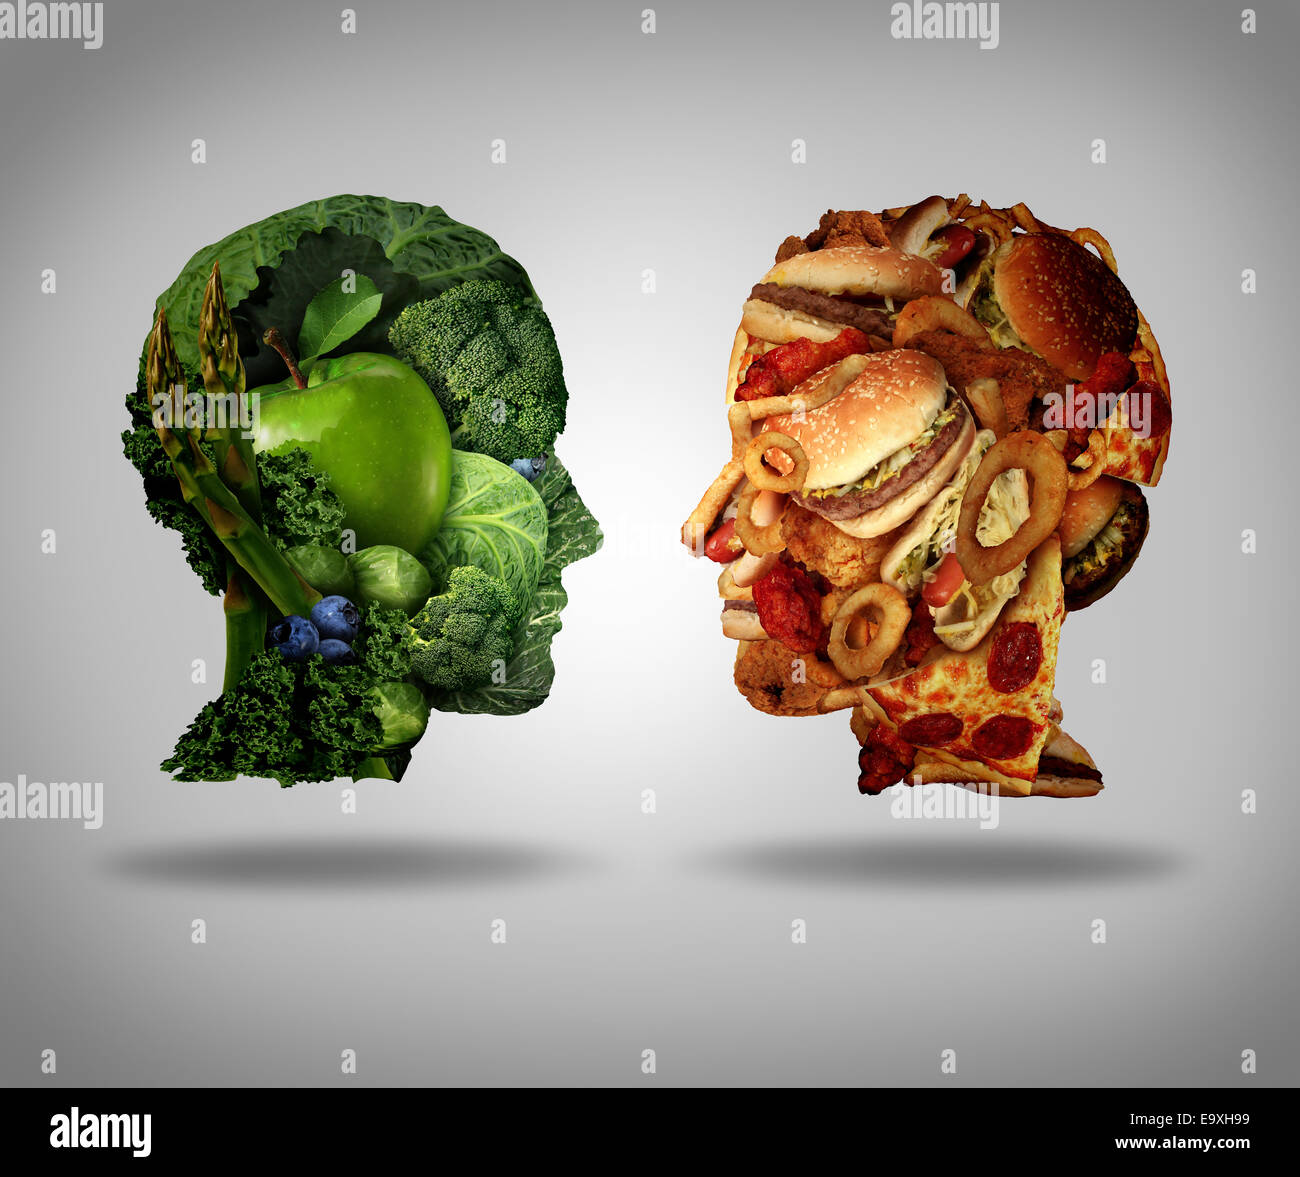 Lifestyle choice and dilemma concept as a two human faces one made of fresh green vegetables and fruit and the other head shaped with greasy fast food as hamburgers and fried foods as a symbol of nutrition facts and healthy living issues. Stock Photo